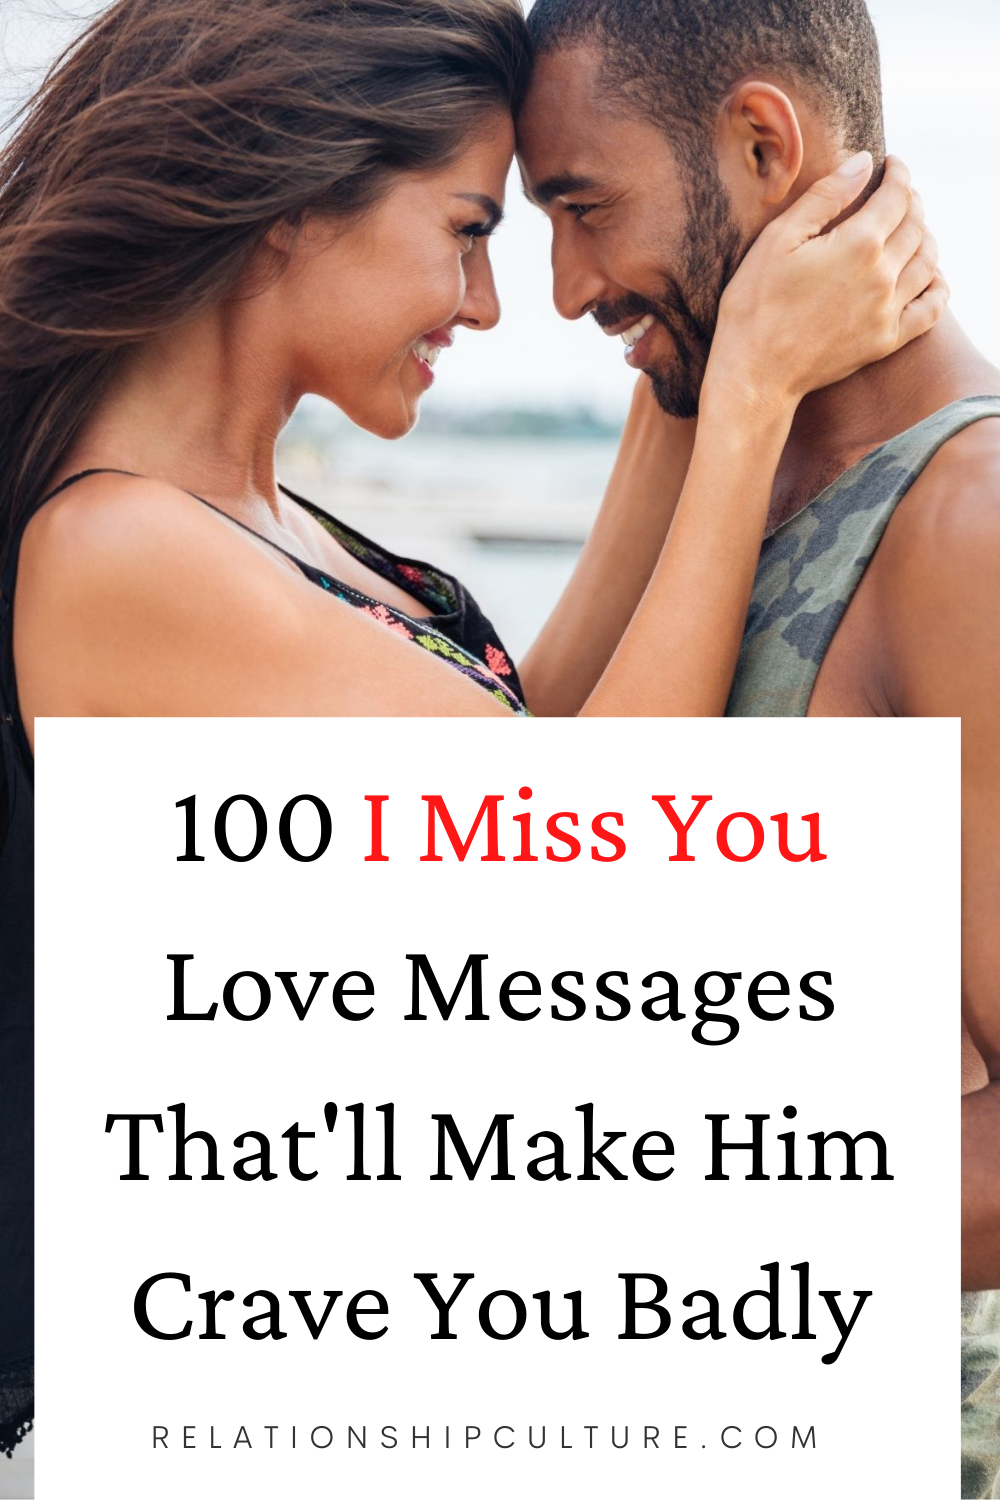 Message love missing you text ‘I love